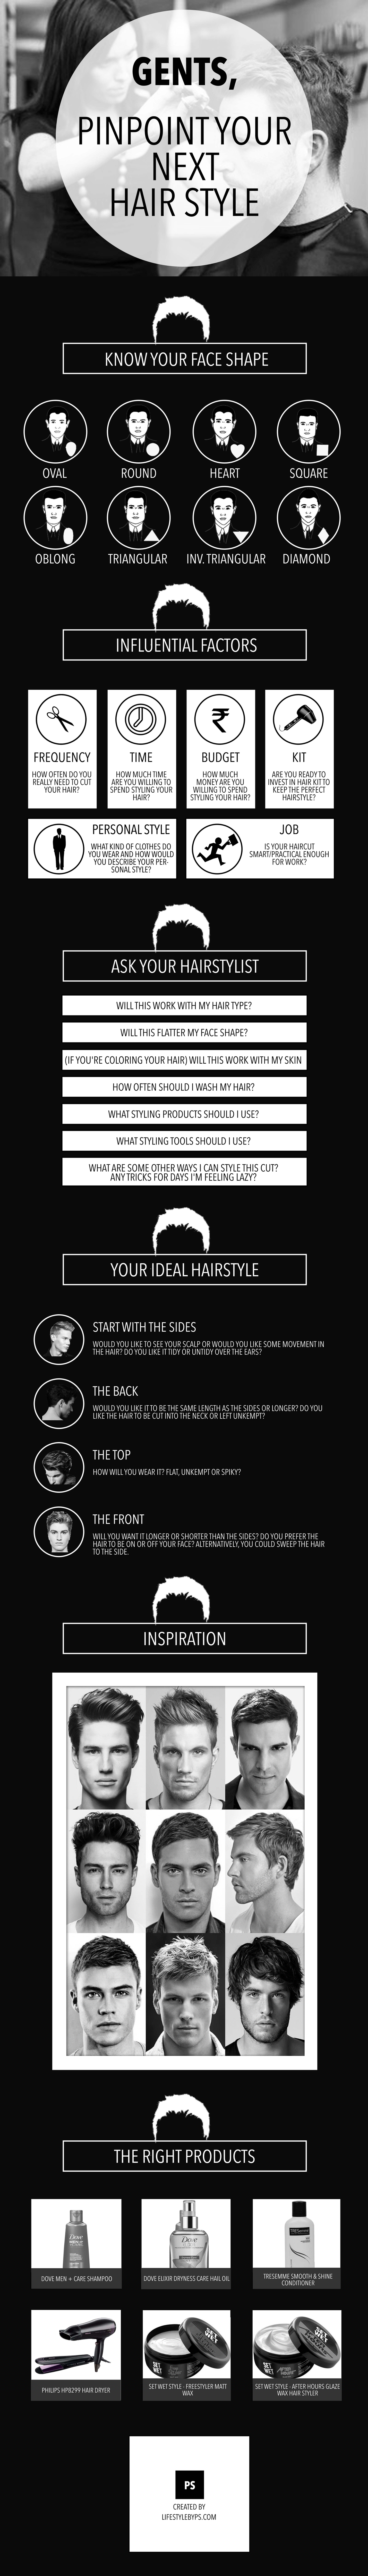 how to have best hairstyle